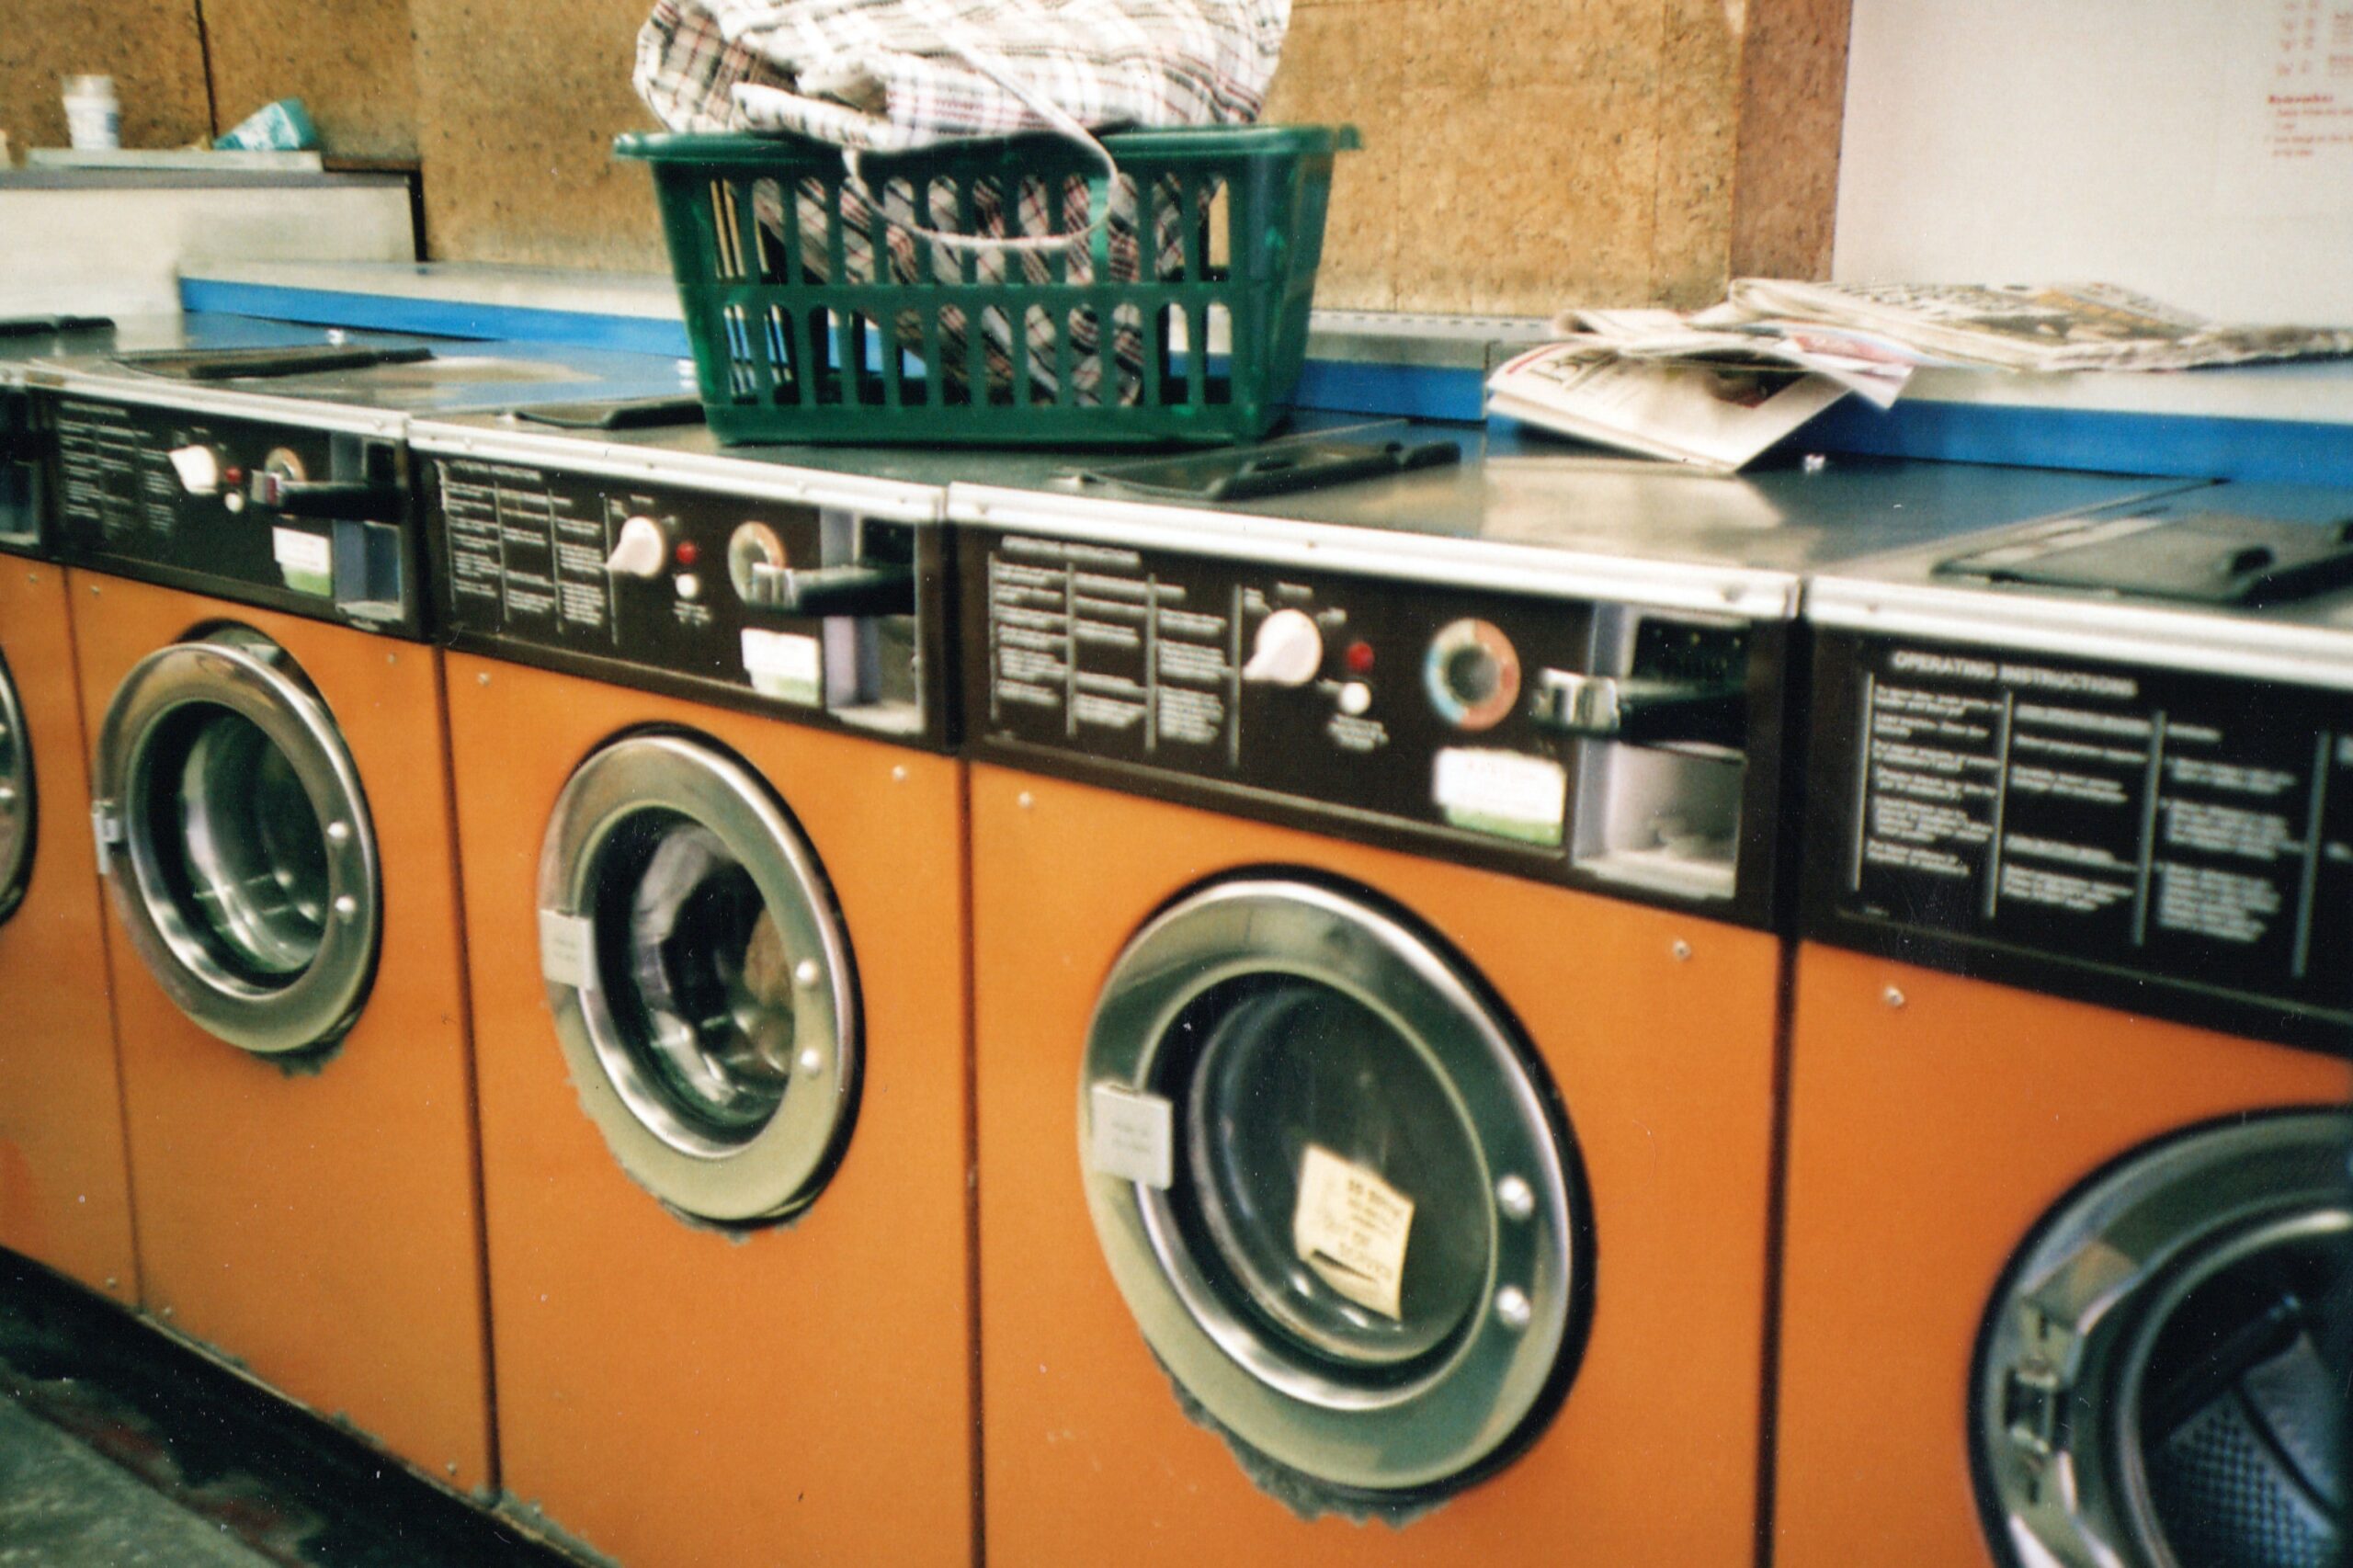 understanding the pricing at laundry